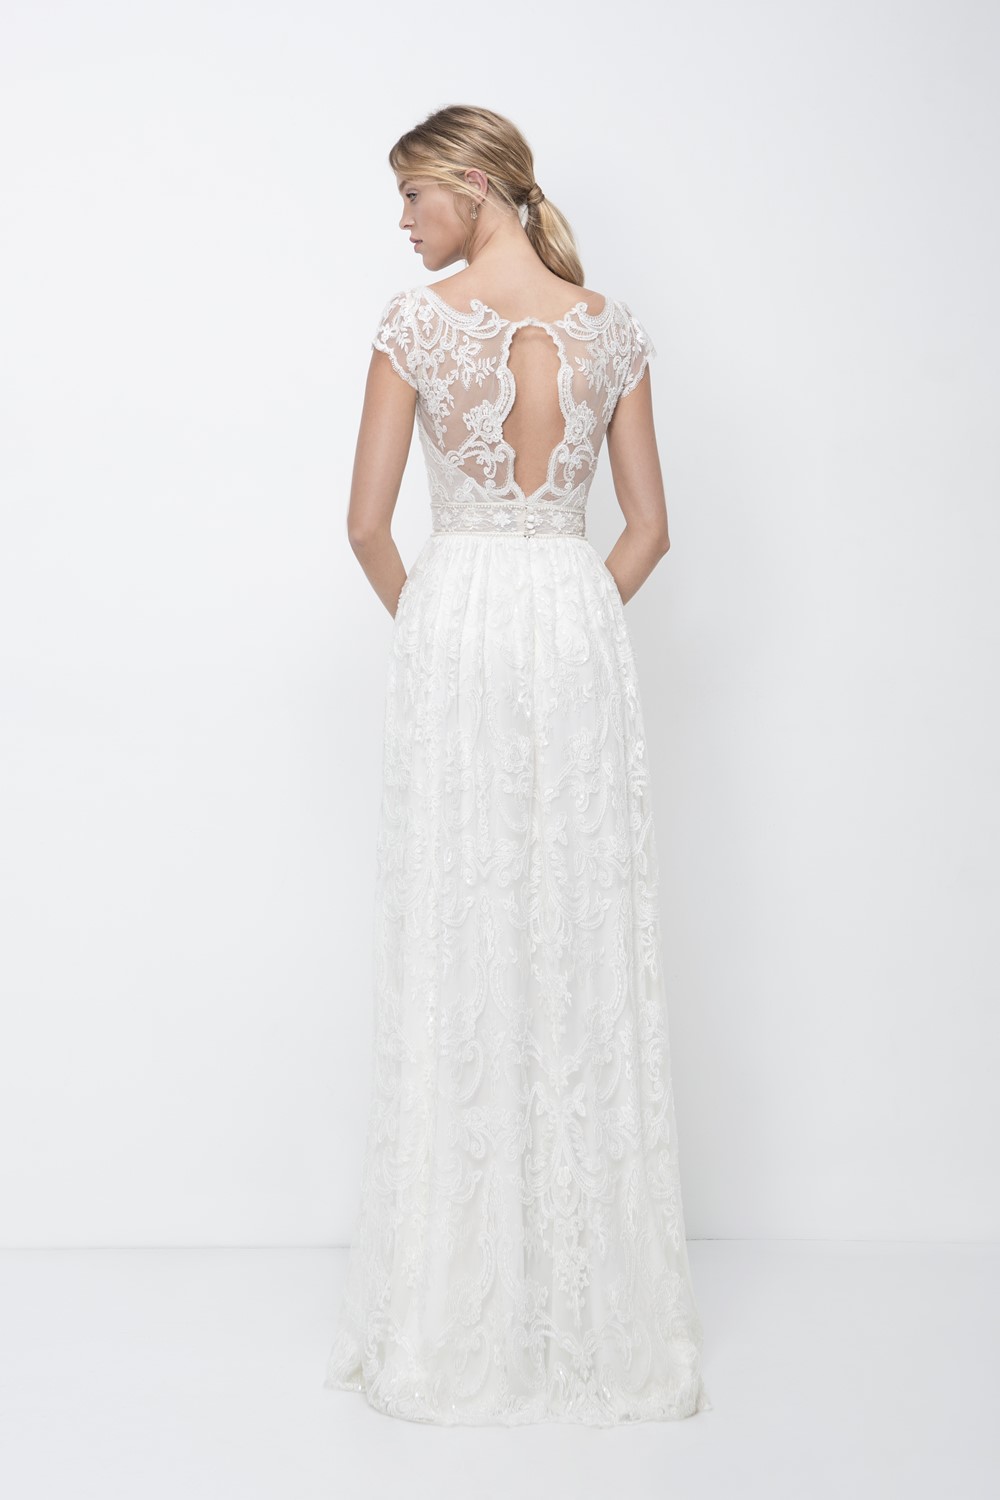 Sabine Wedding Dress from Lihi Hod's 2018 Bridal Collection